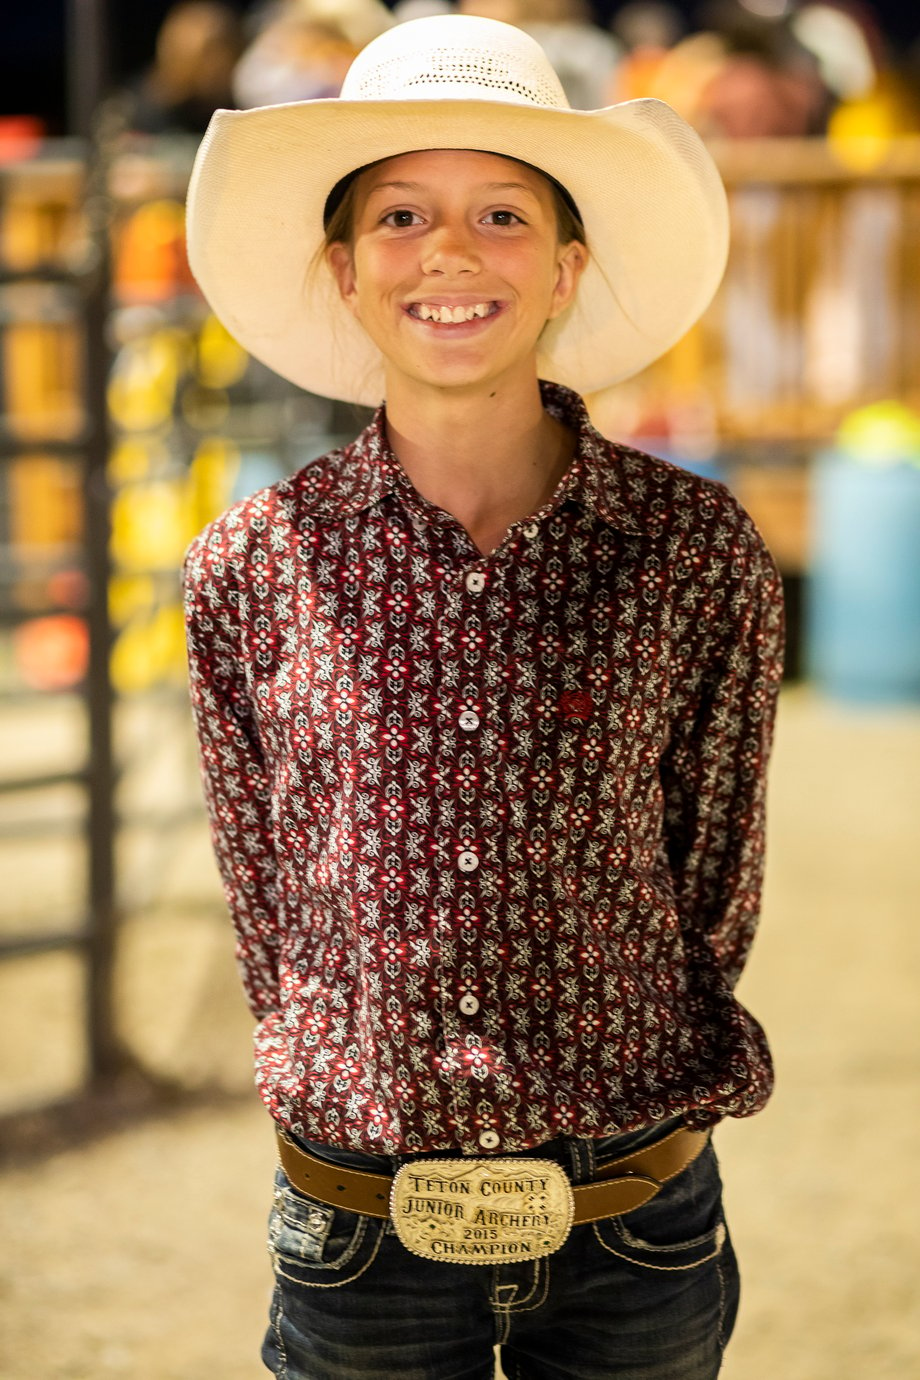 A child in a cowboy hat poses for Adam Hester; his belt buckle says Teton County Junior Archery Champion 2015